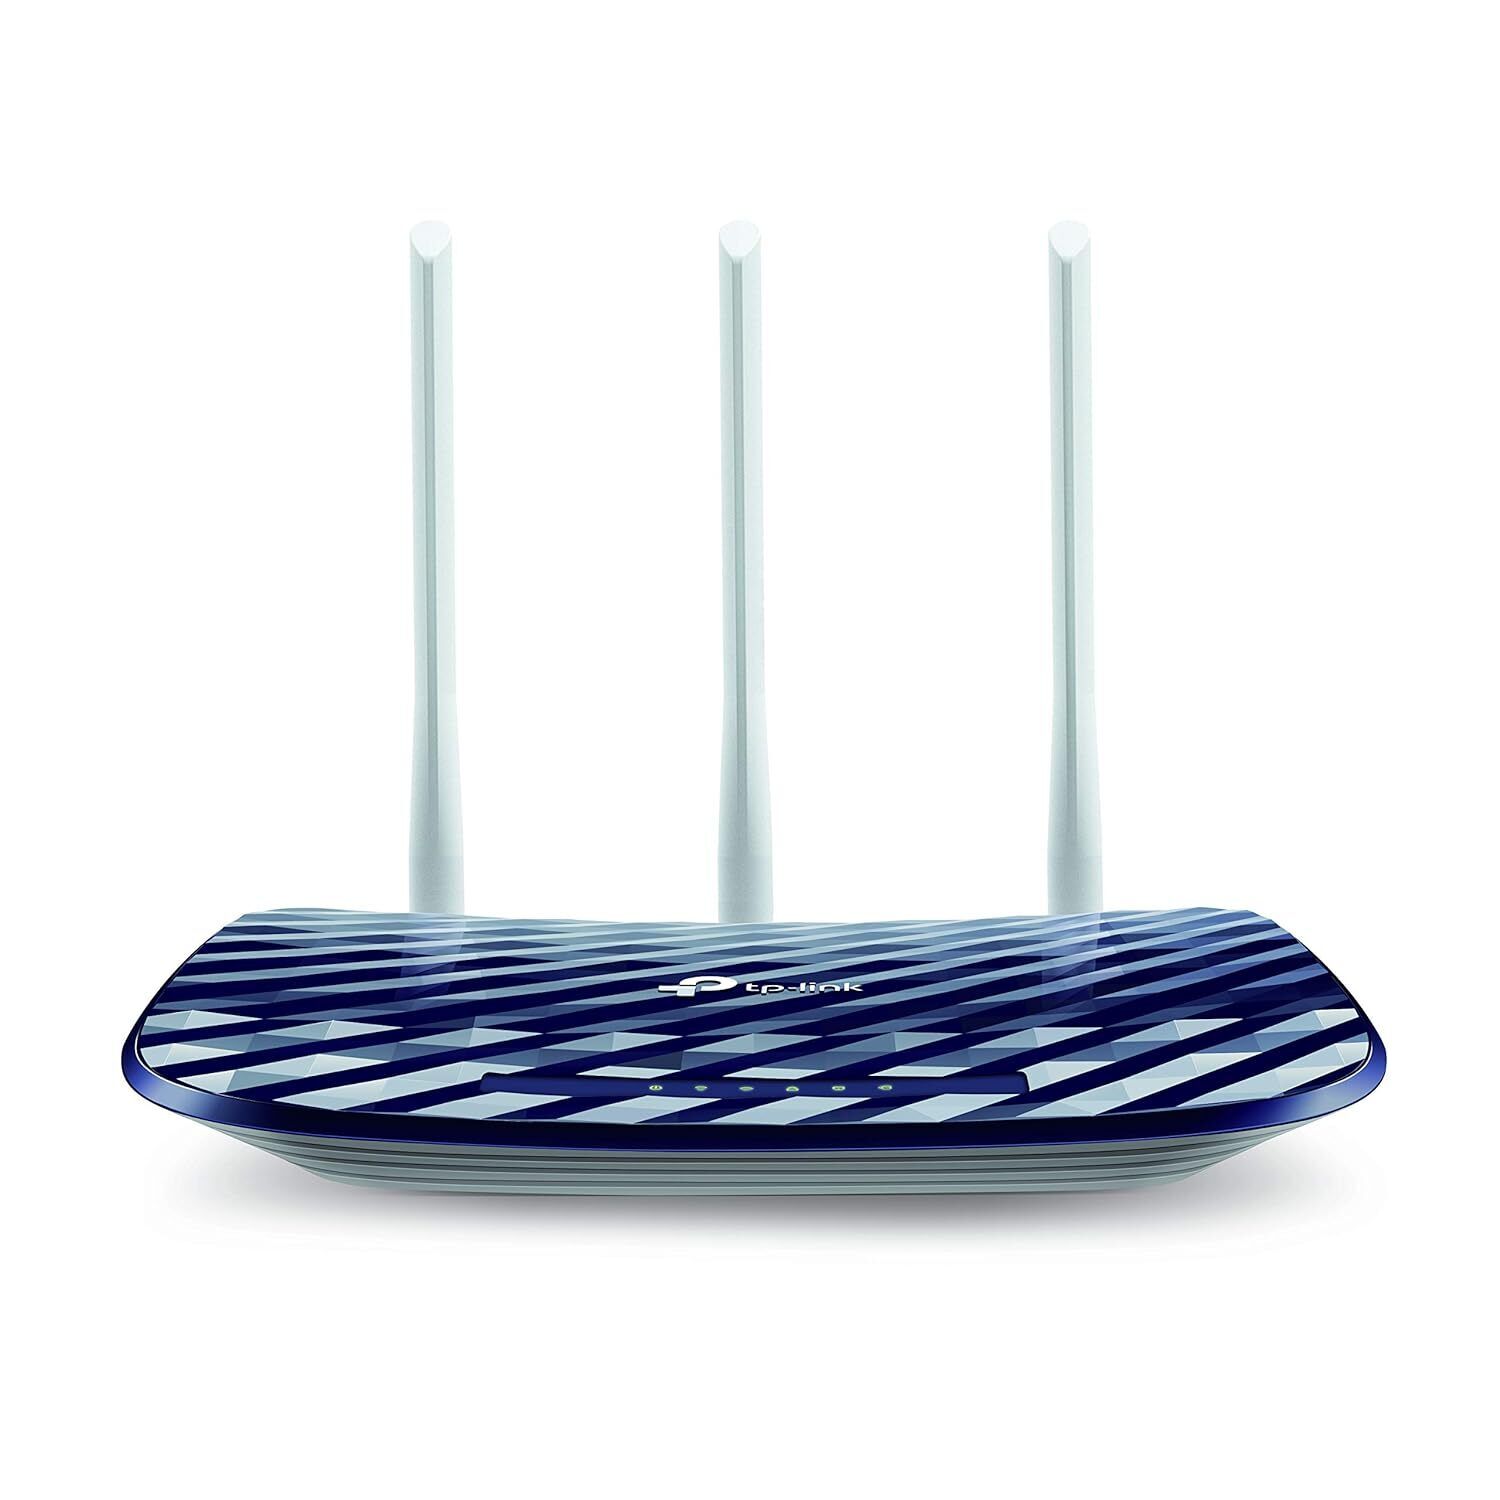 TP-LINK AC750 IEEE 802.11ac Ethernet Wireless Dual Band Router Model Archer C2